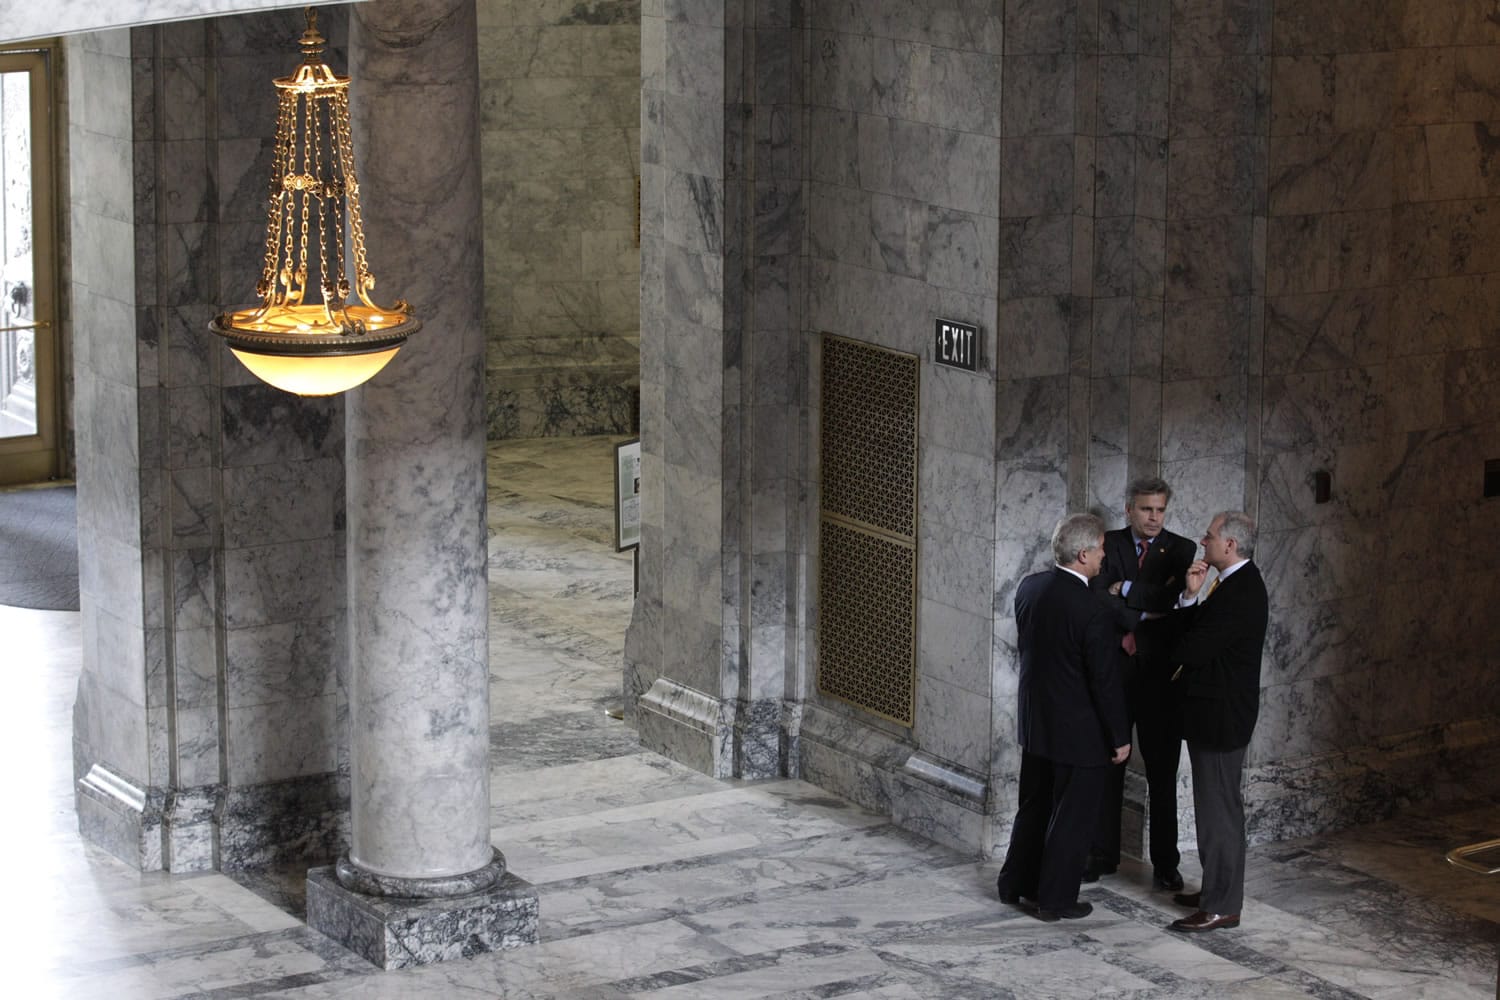 Rep. Glenn Anderson, R-Fall City, left, Sen. Steve Litzow, R-Mercer Island, center, and Rep. Reuven Carlyle, D-Seattle, right, confer in a hallway near Gov. Chris Gregoire's office, Tuesday during ongoing budget negotiations at the Capitol in Olympia, Wash.